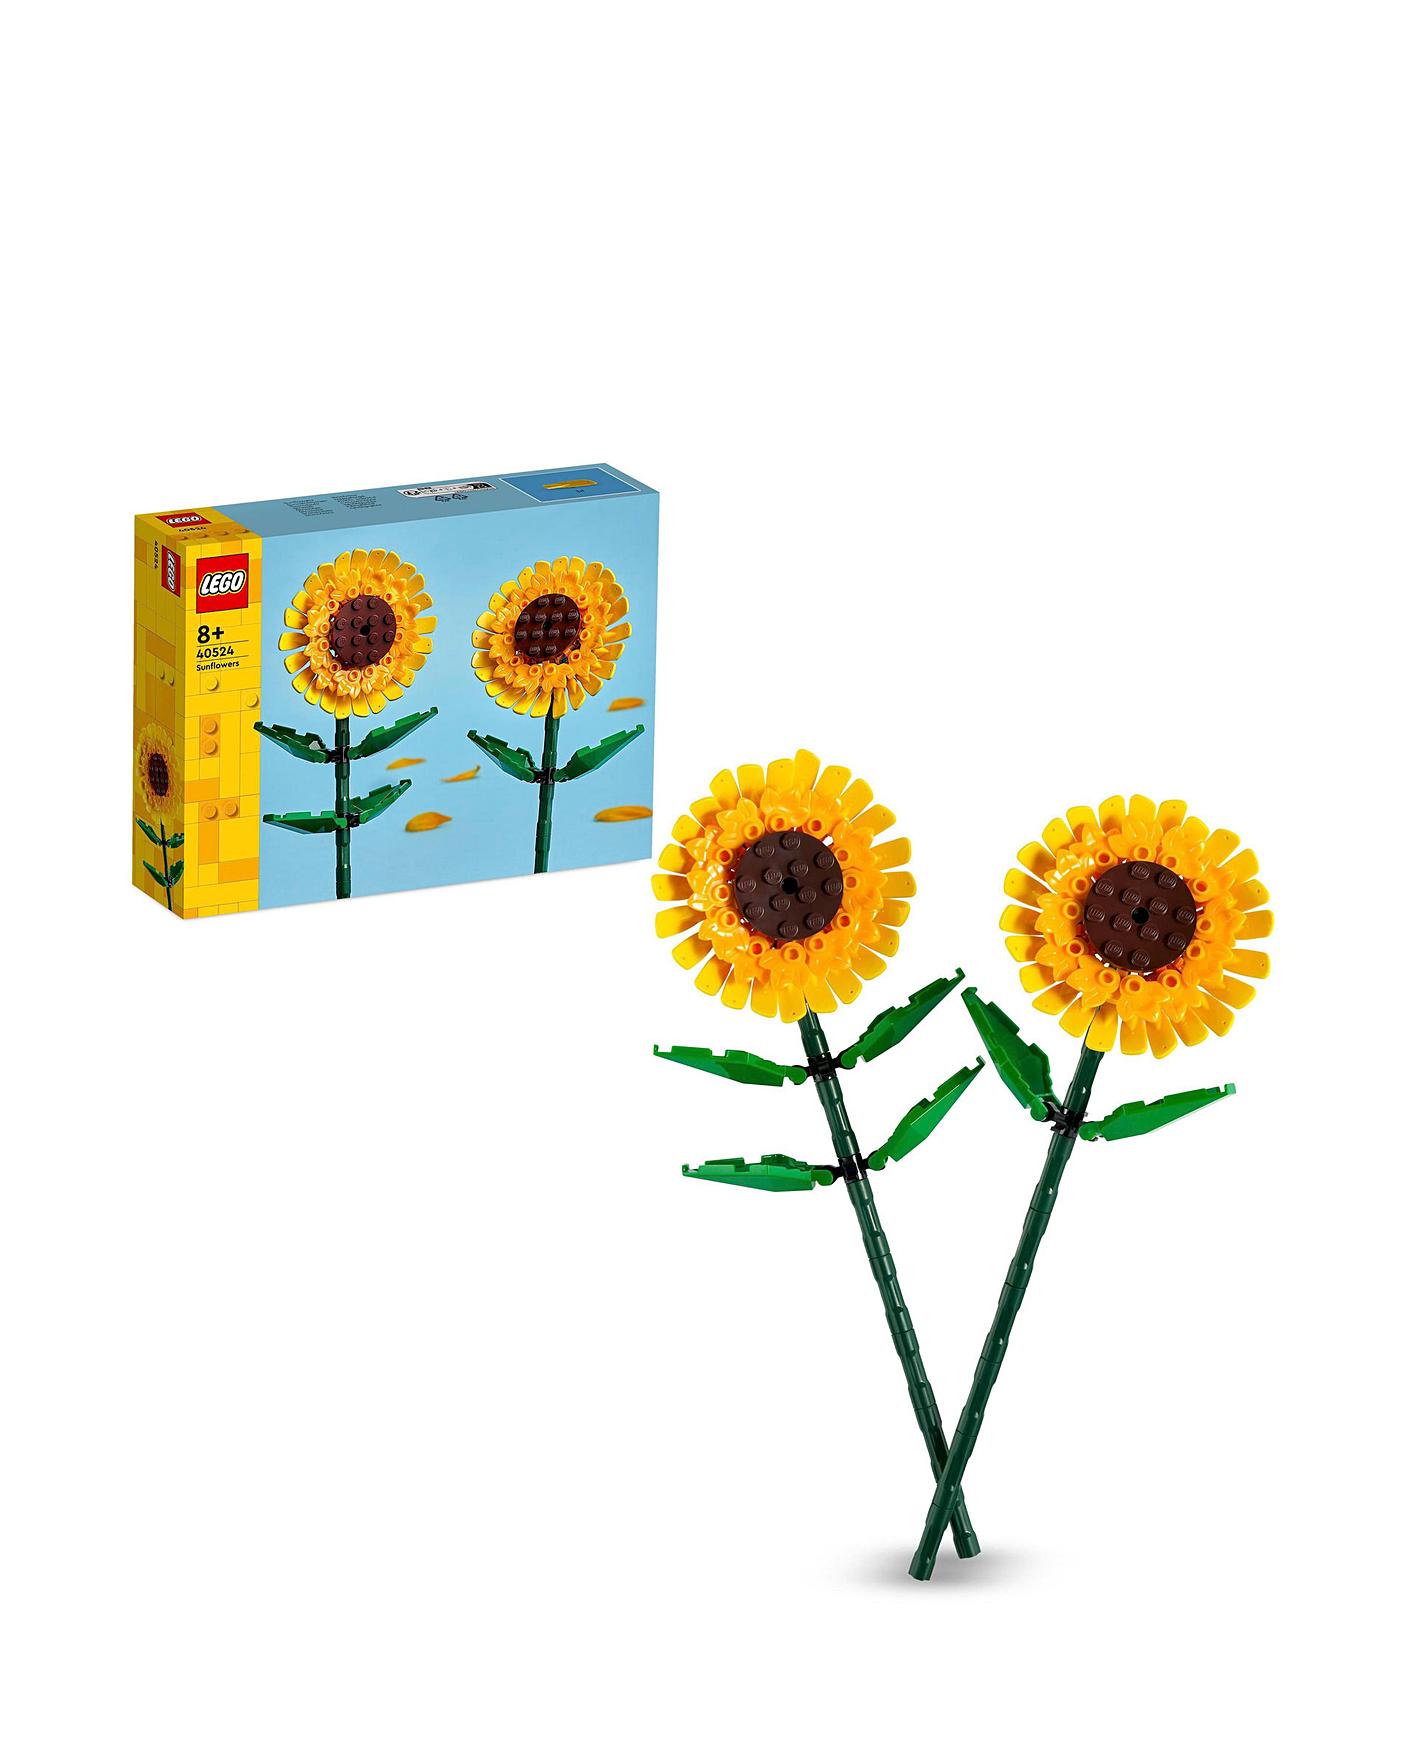 LEGO sunflower 40524, LEGO Store Exclusive, FREE FAST SHIPPING